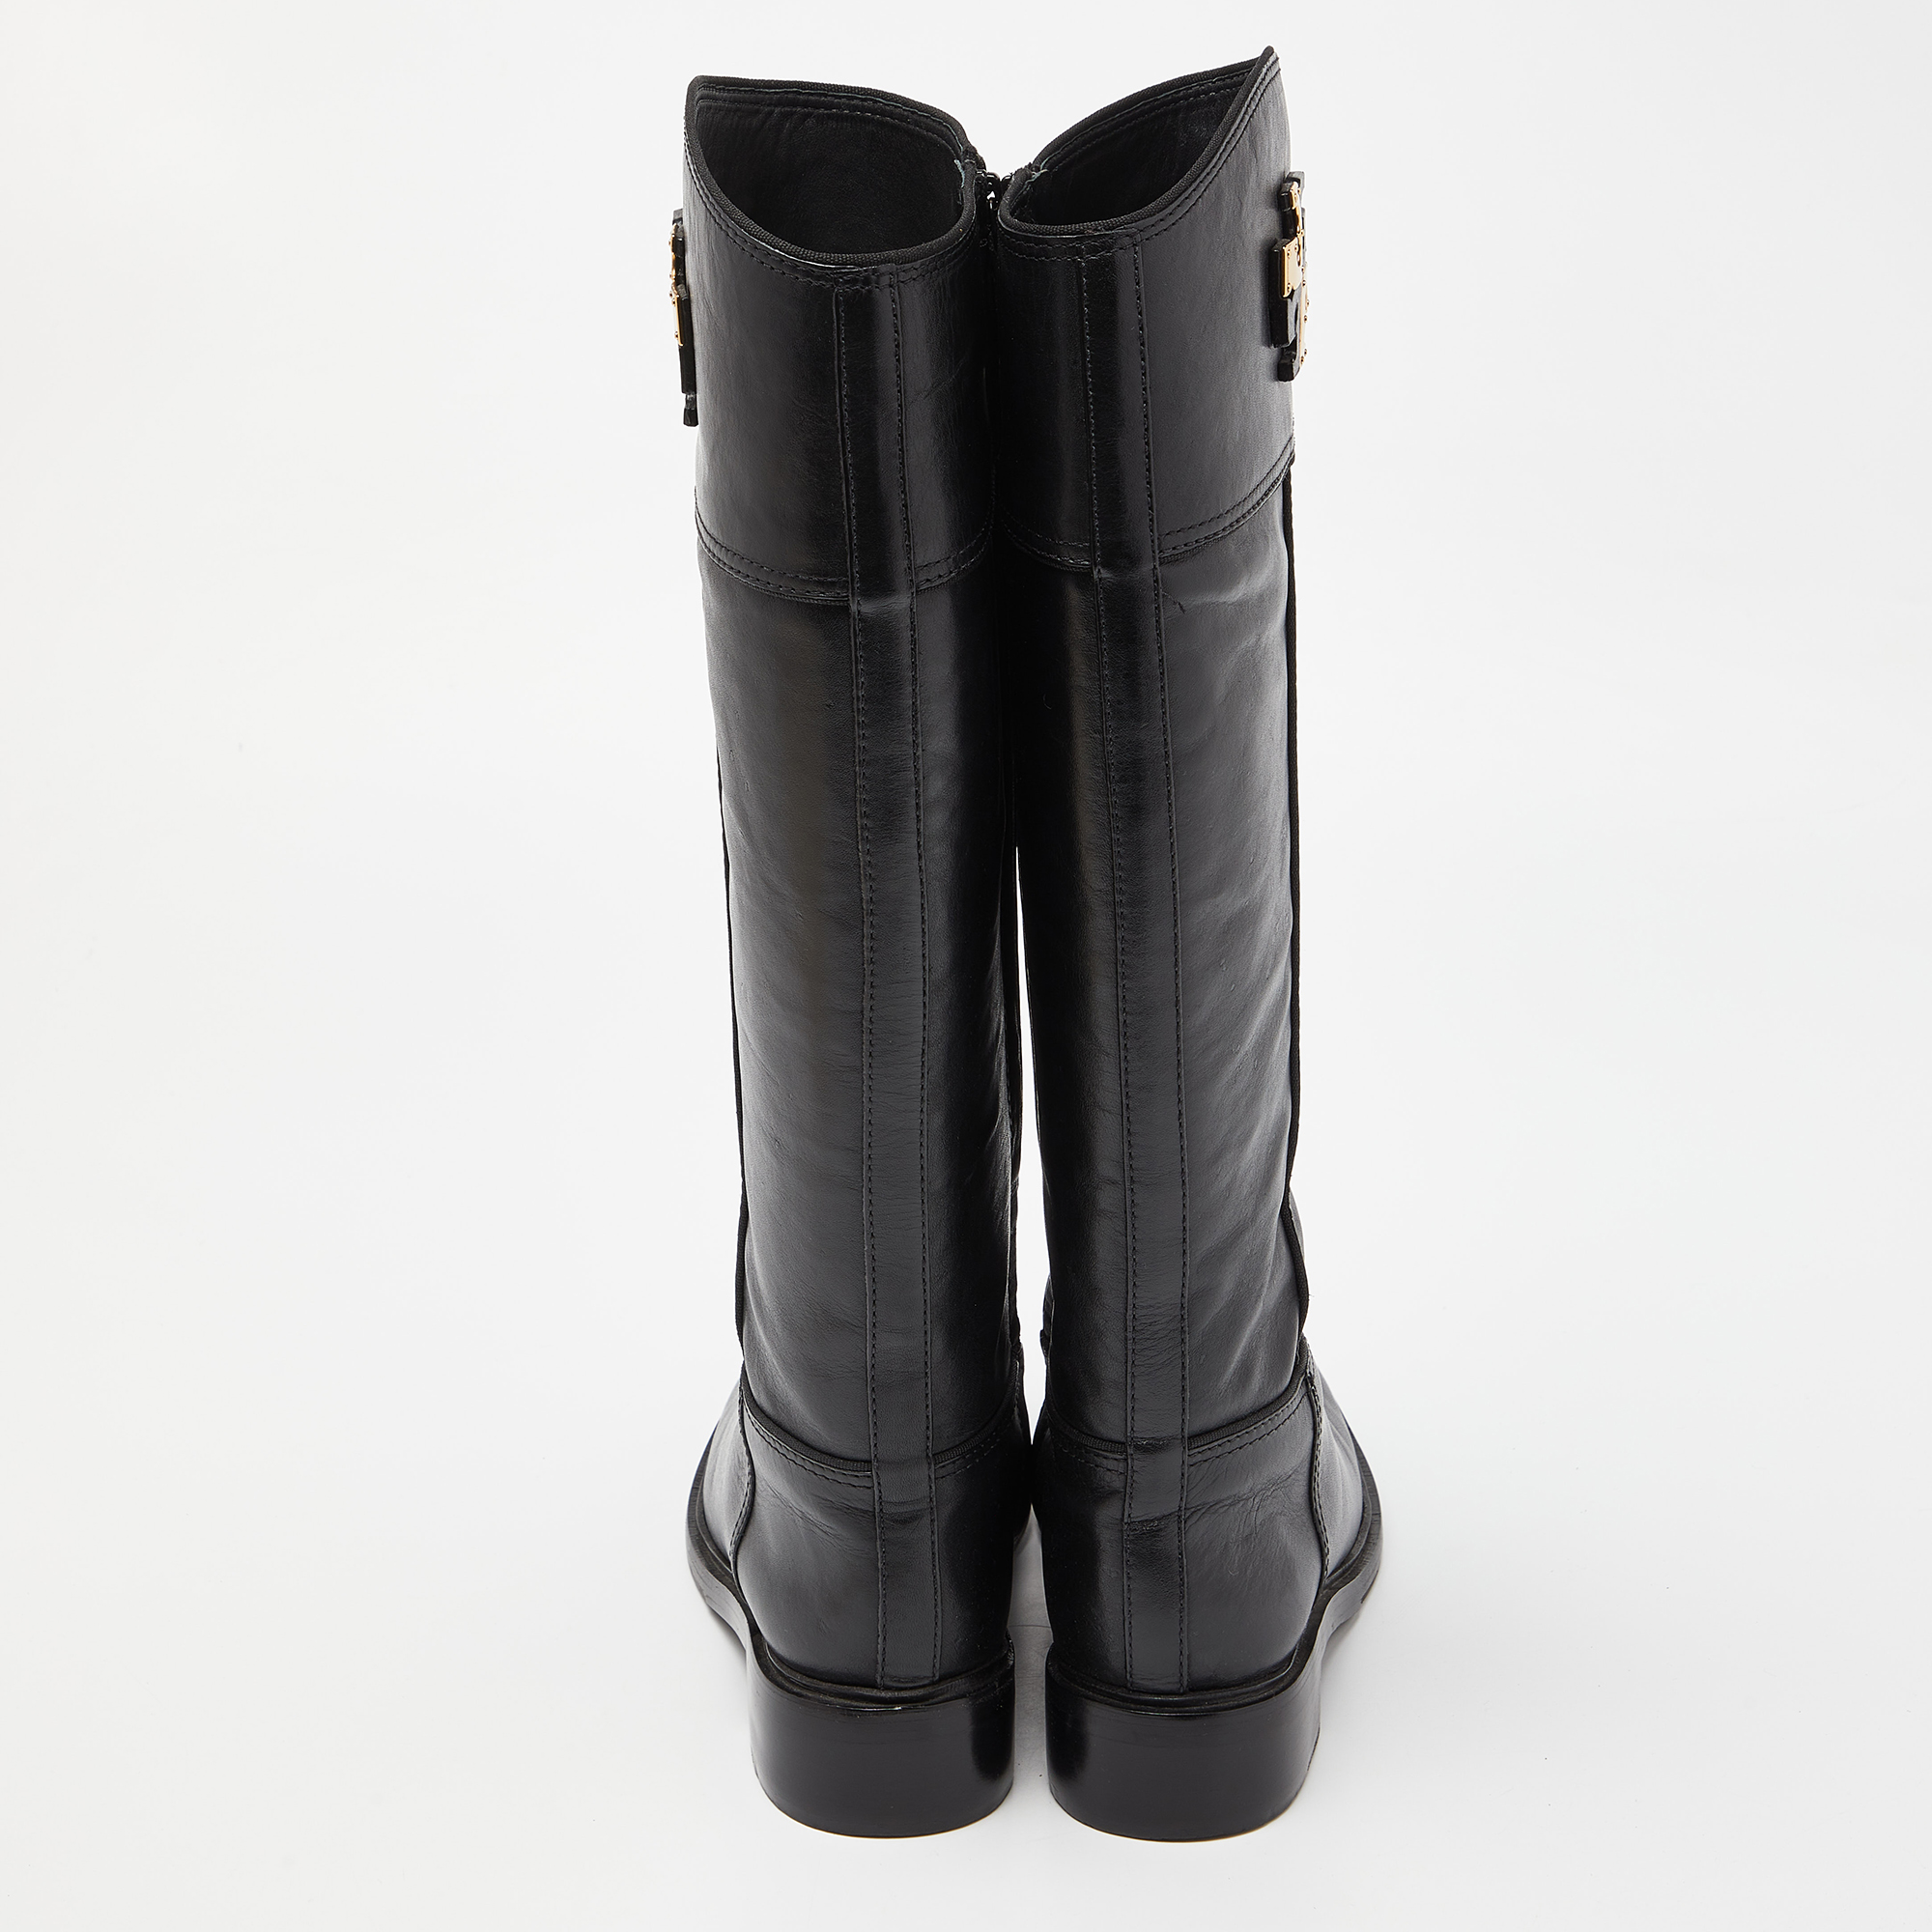 Tory Burch Black Leather Knee Length Boots Size 38.5